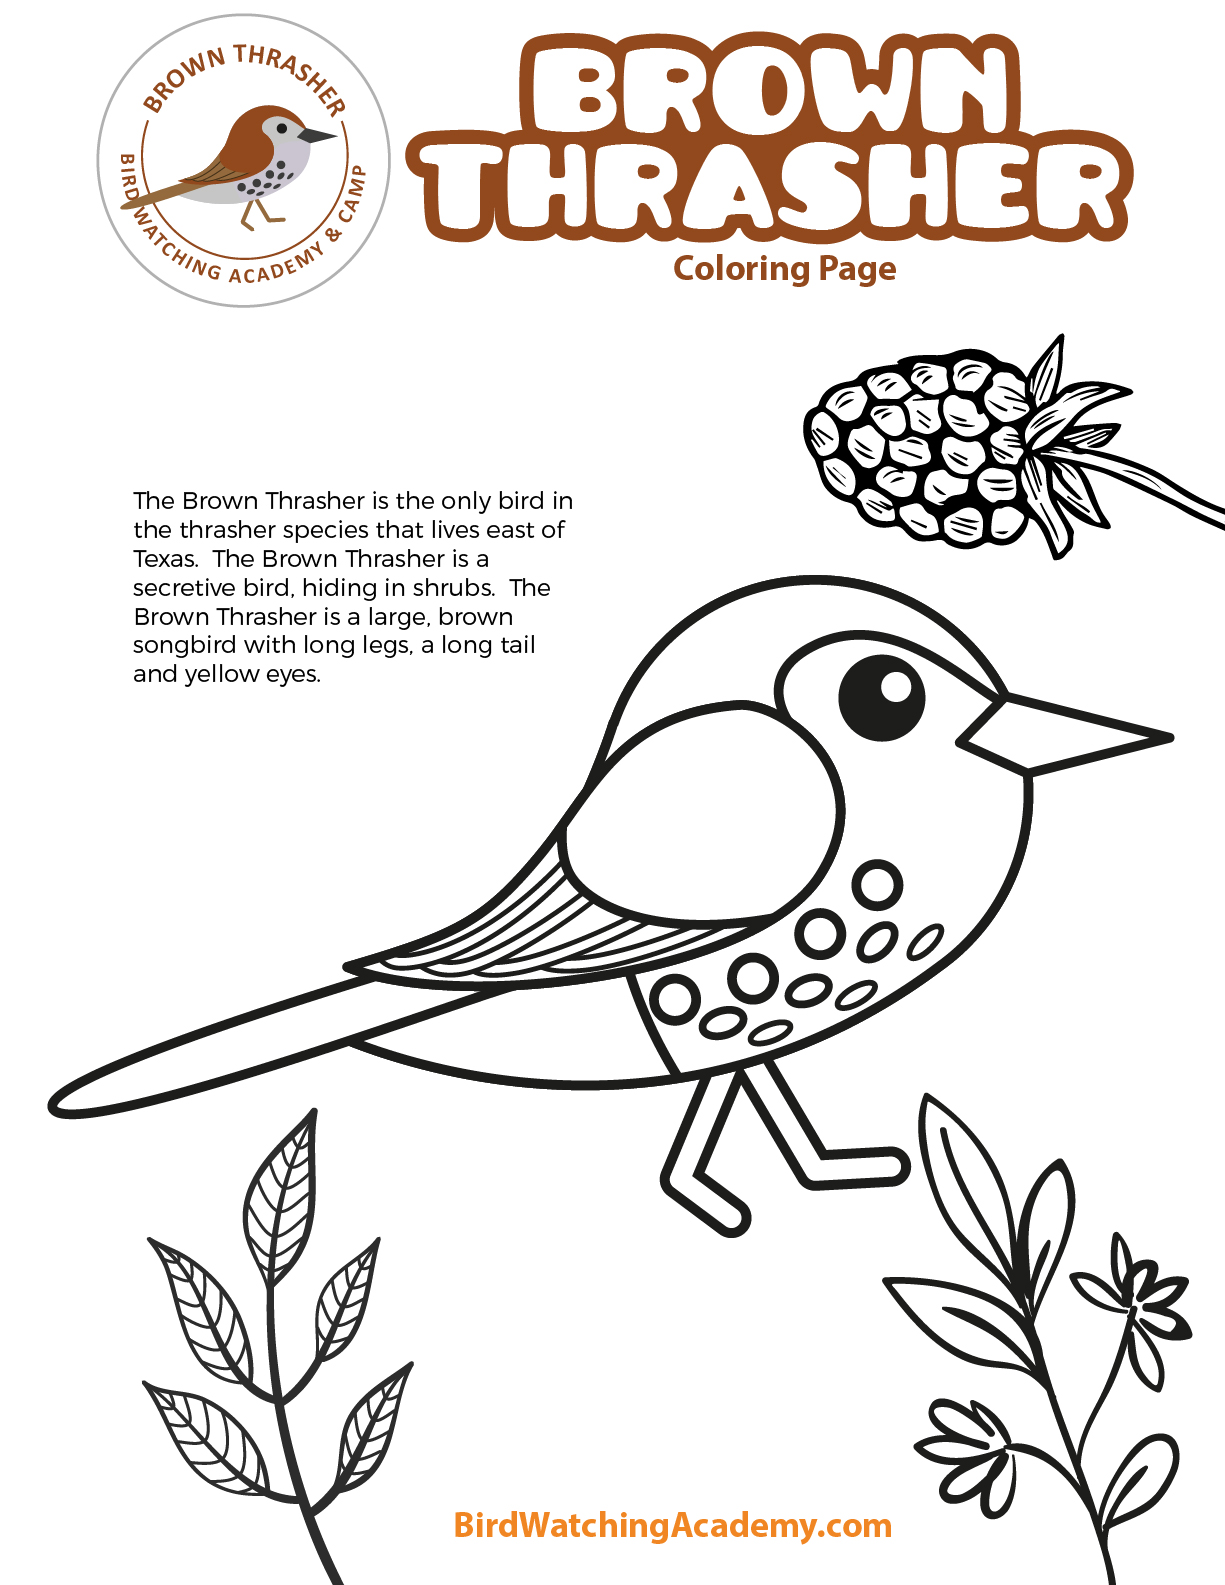 Brown Thrasher Coloring Page - Bird Watching Academy